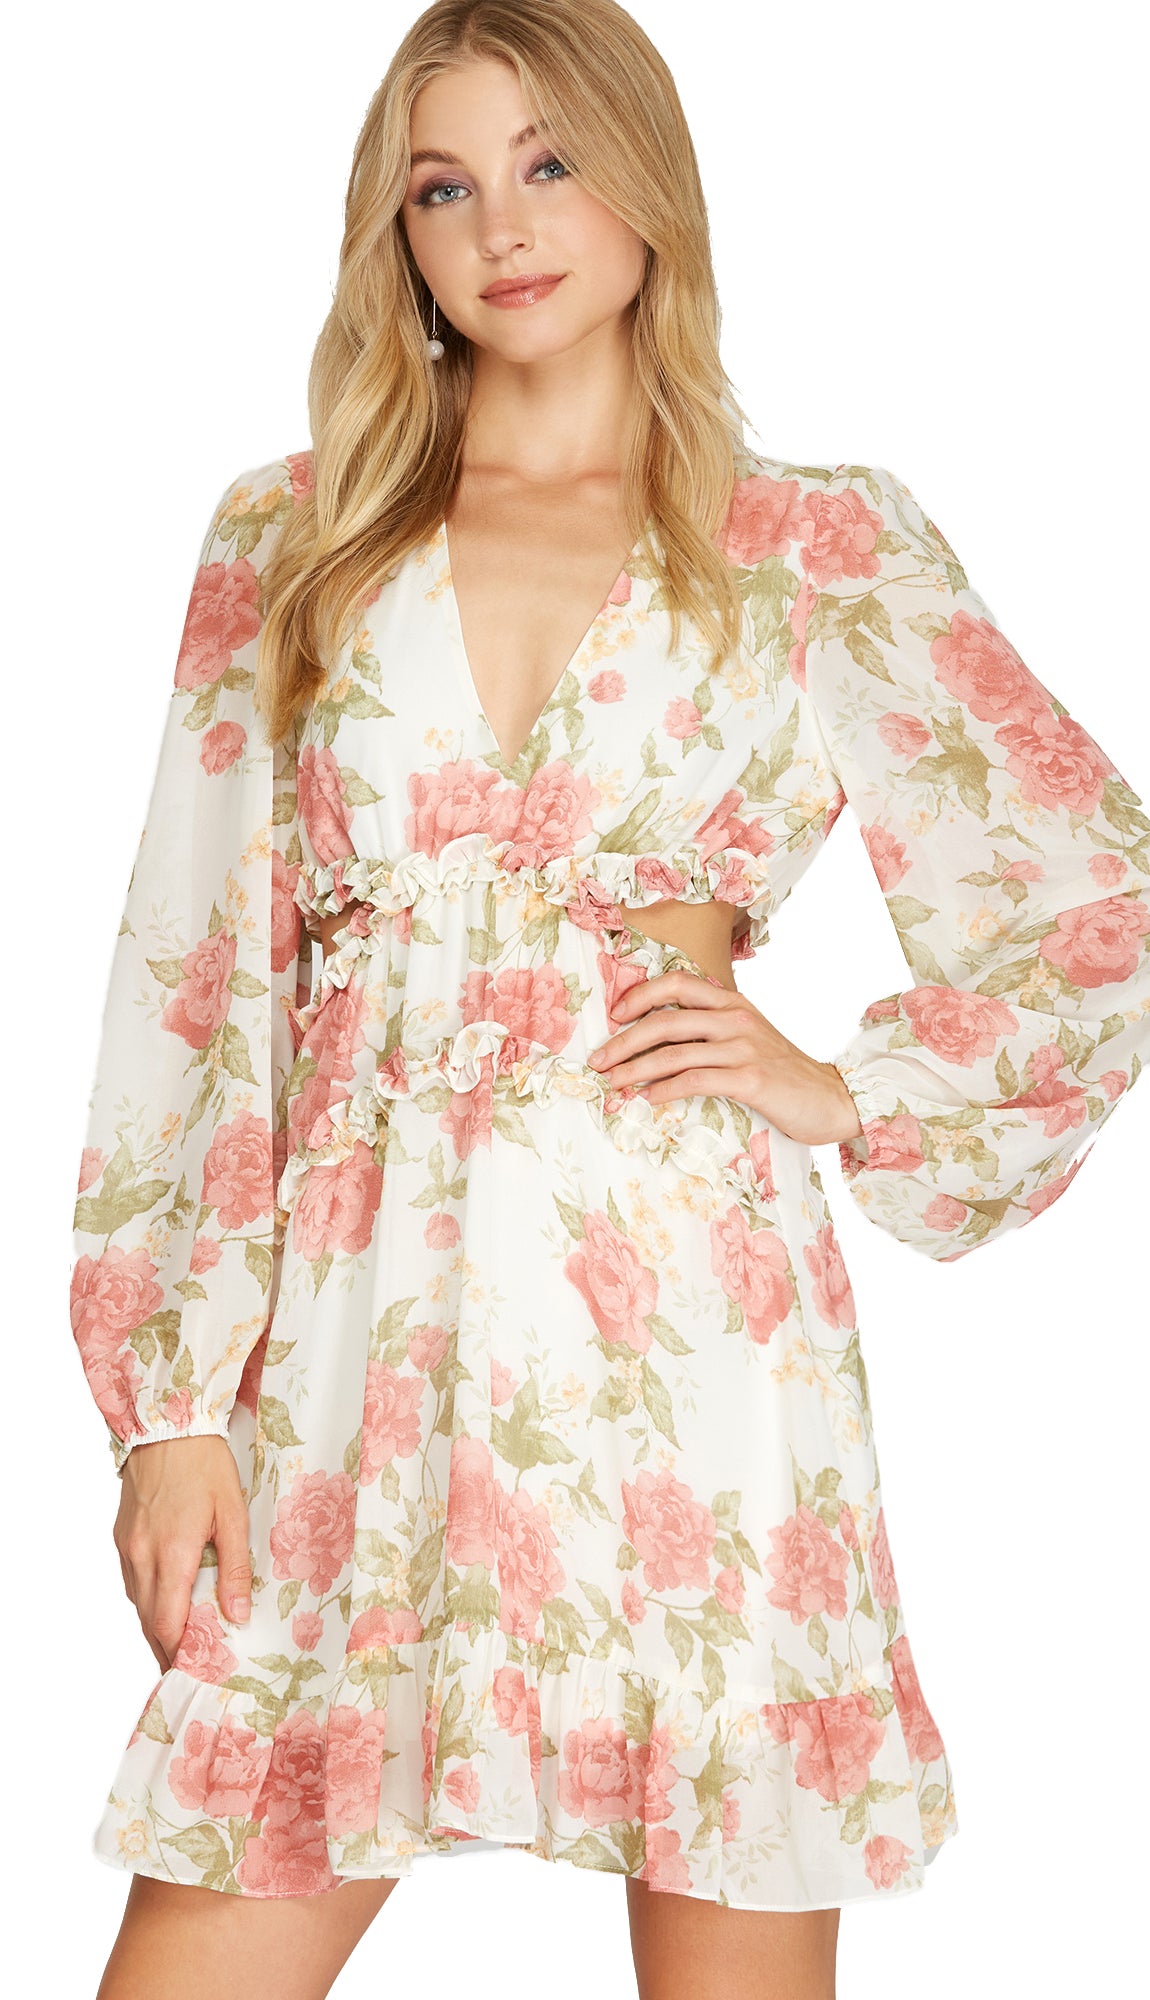 Floral Chiffon Tiered Dress - Pretty Little Things